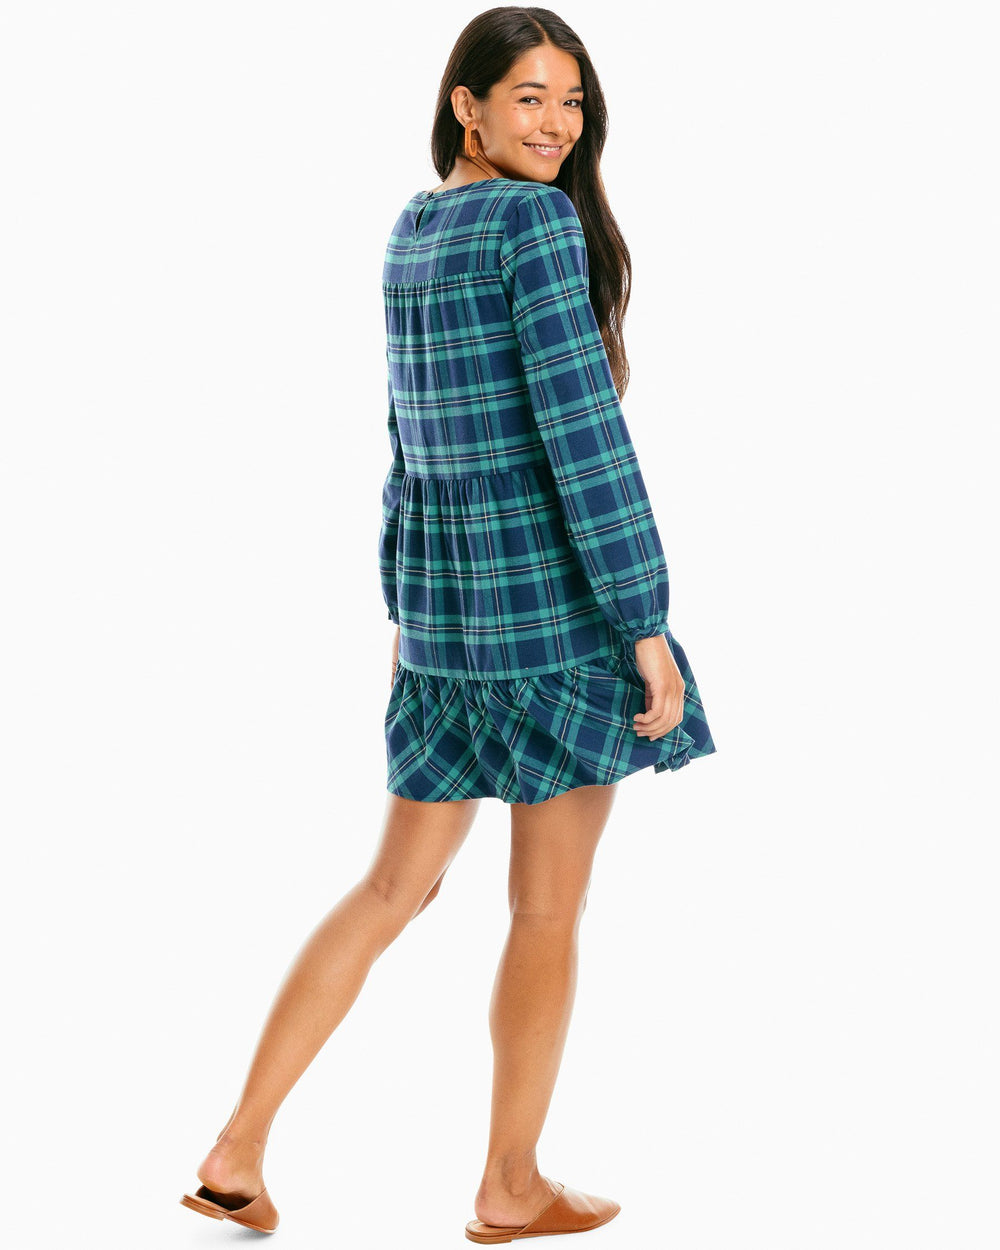 The back of the Women's Nadia Flannel Intercoastal Dress by Southern Tide - Evening Emerald